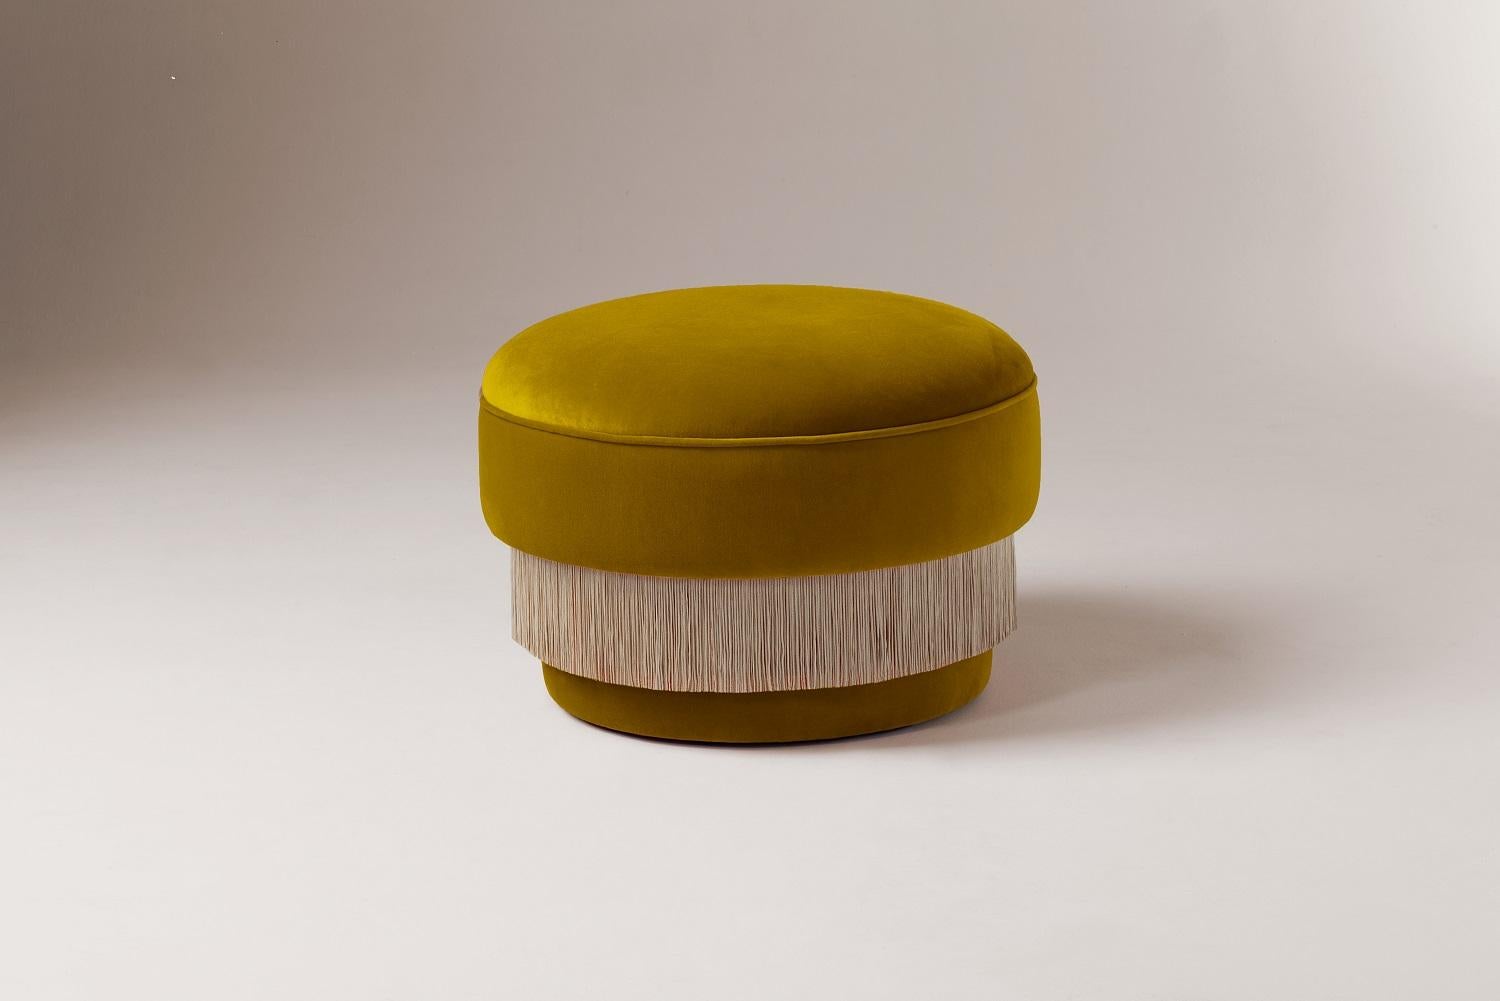 With voluptuous curves and perfect poise, the Mid-Century Modern inspired La Folie Pouf Ottoman exalts passion and fantasy as if you were in a burlesque show at Moulin Rouge. Let yourself be drawn by this flirtatious feeling of sensuality and a